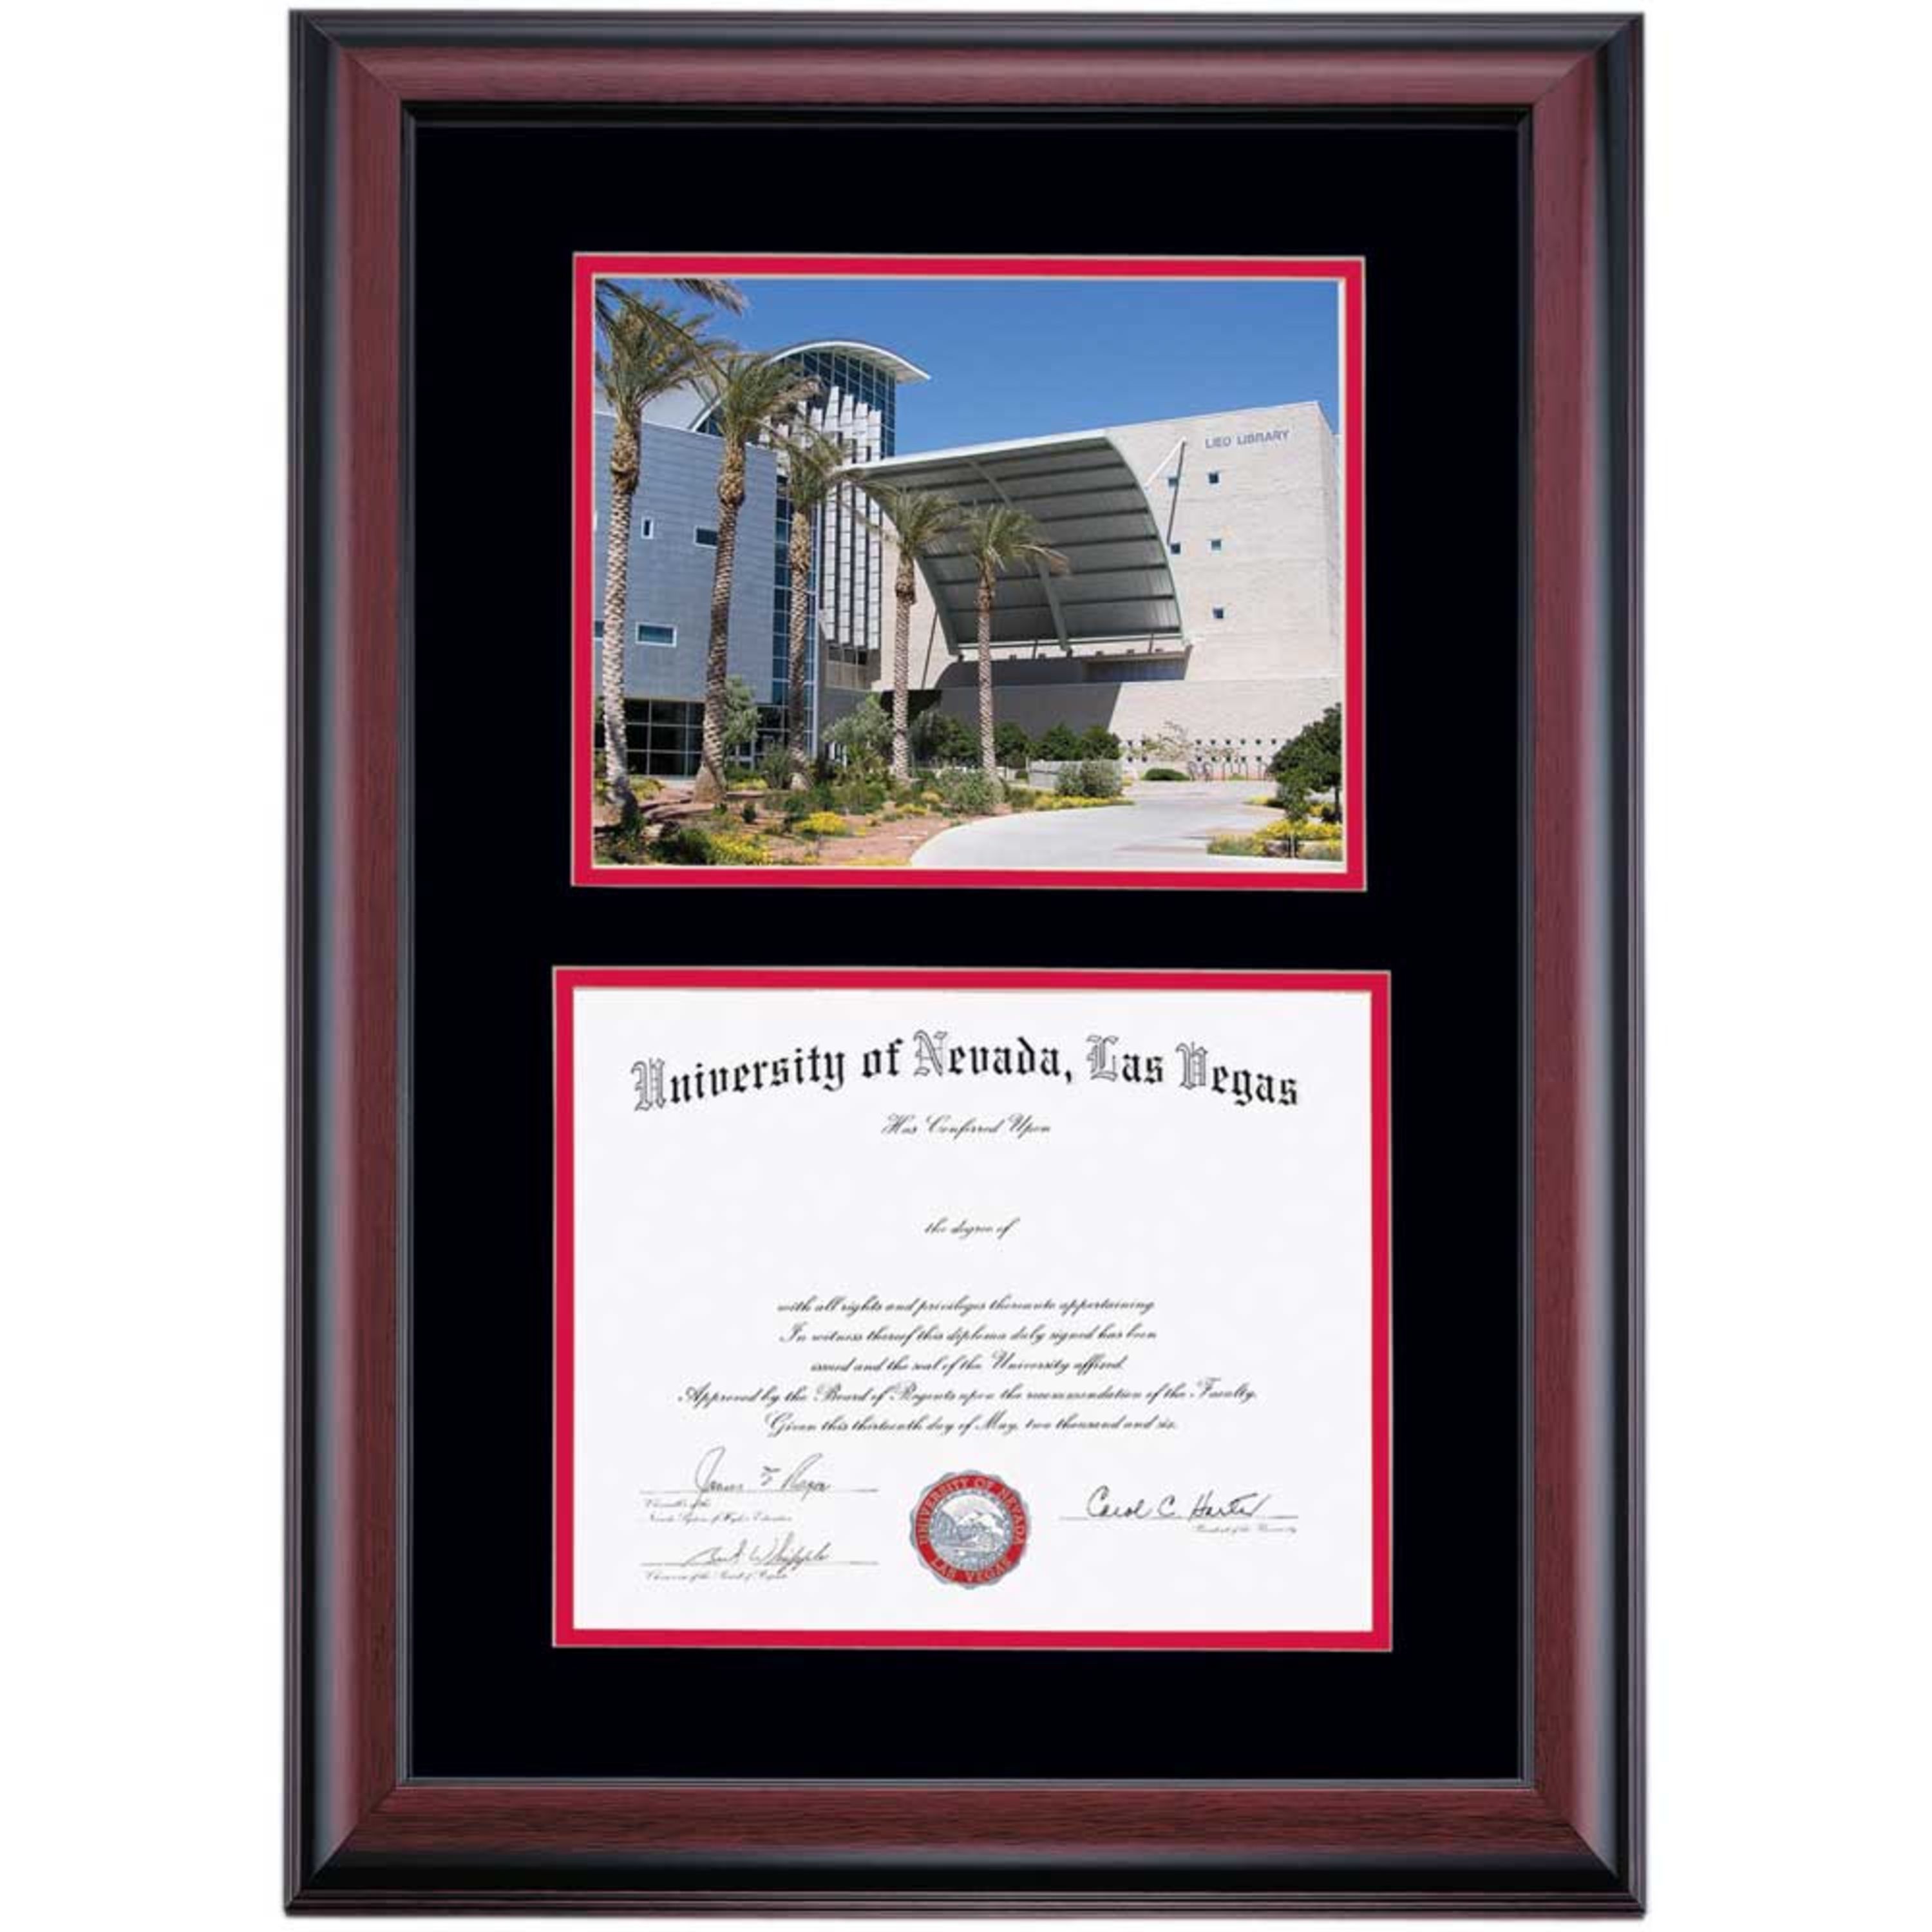 OCM Diploma Frame for University of Nevada, Las Vegas UNLV, Black/Cherry Mat with Lied Library Photograph, 24" x 17" - image 1 of 5